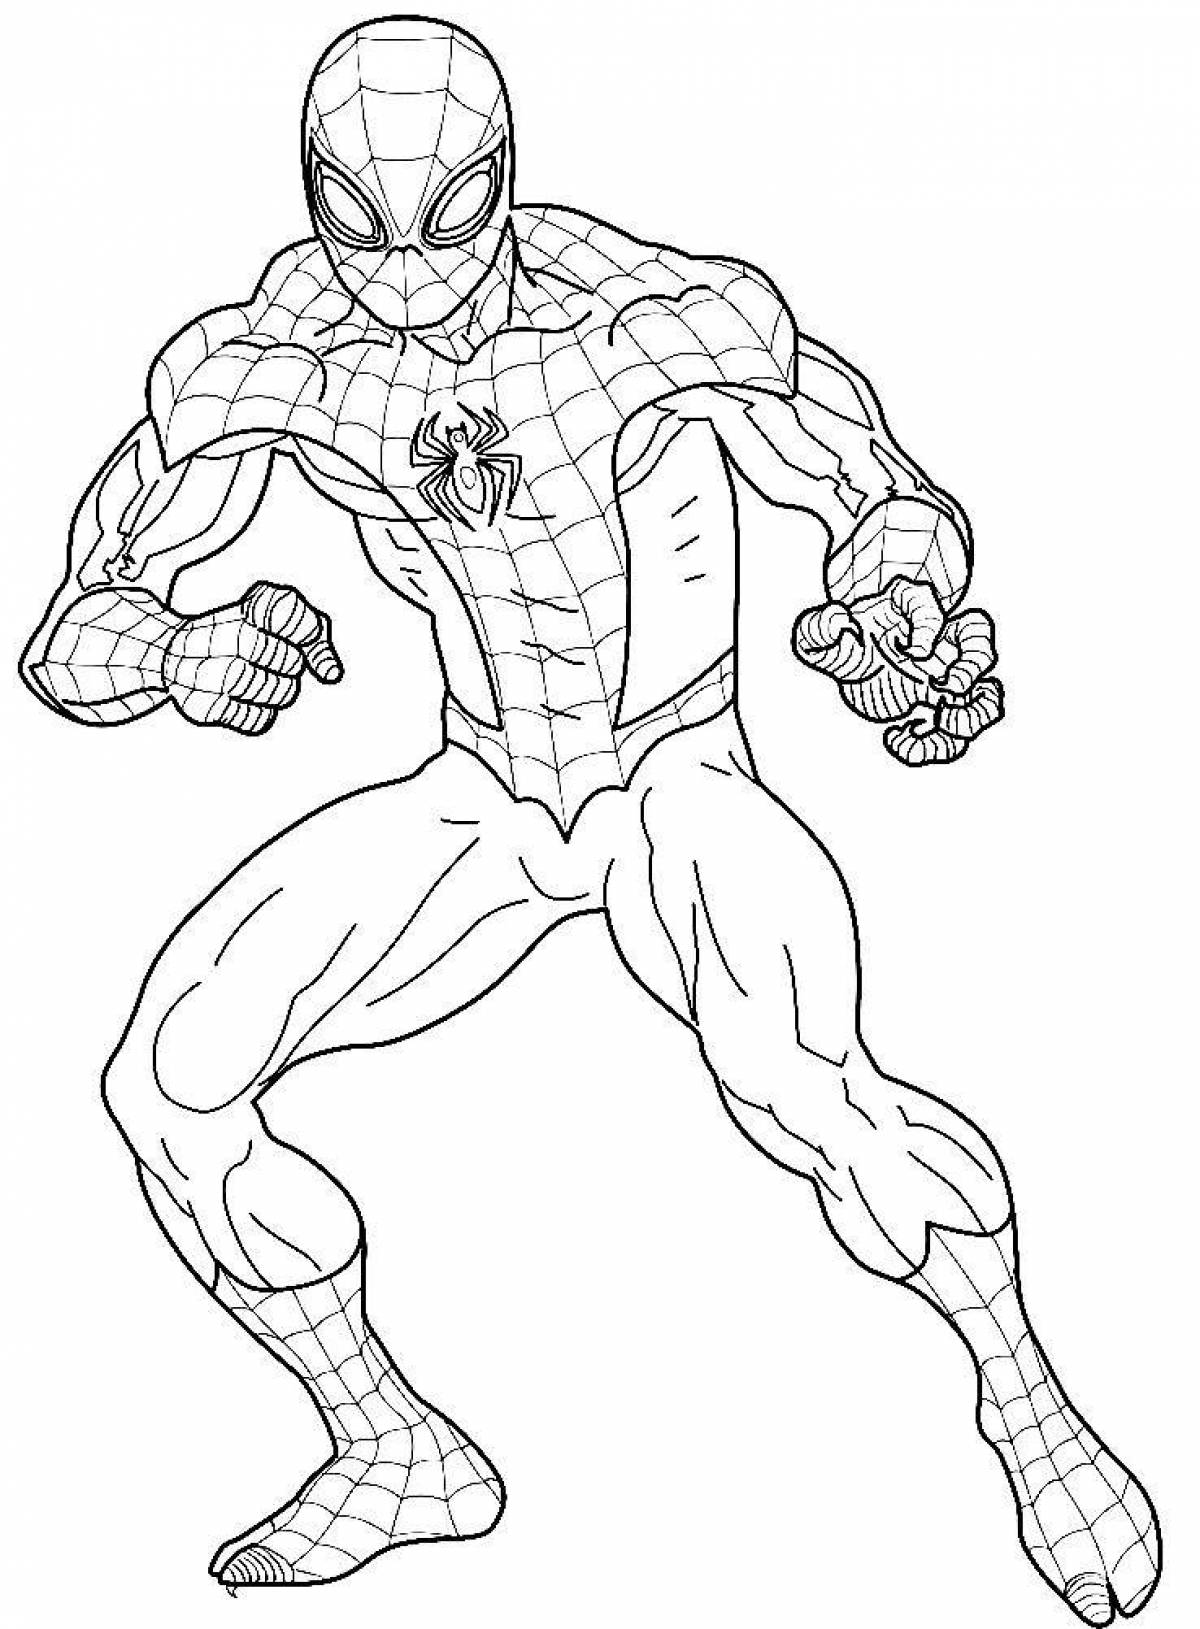 A wonderful drawing of spider-man